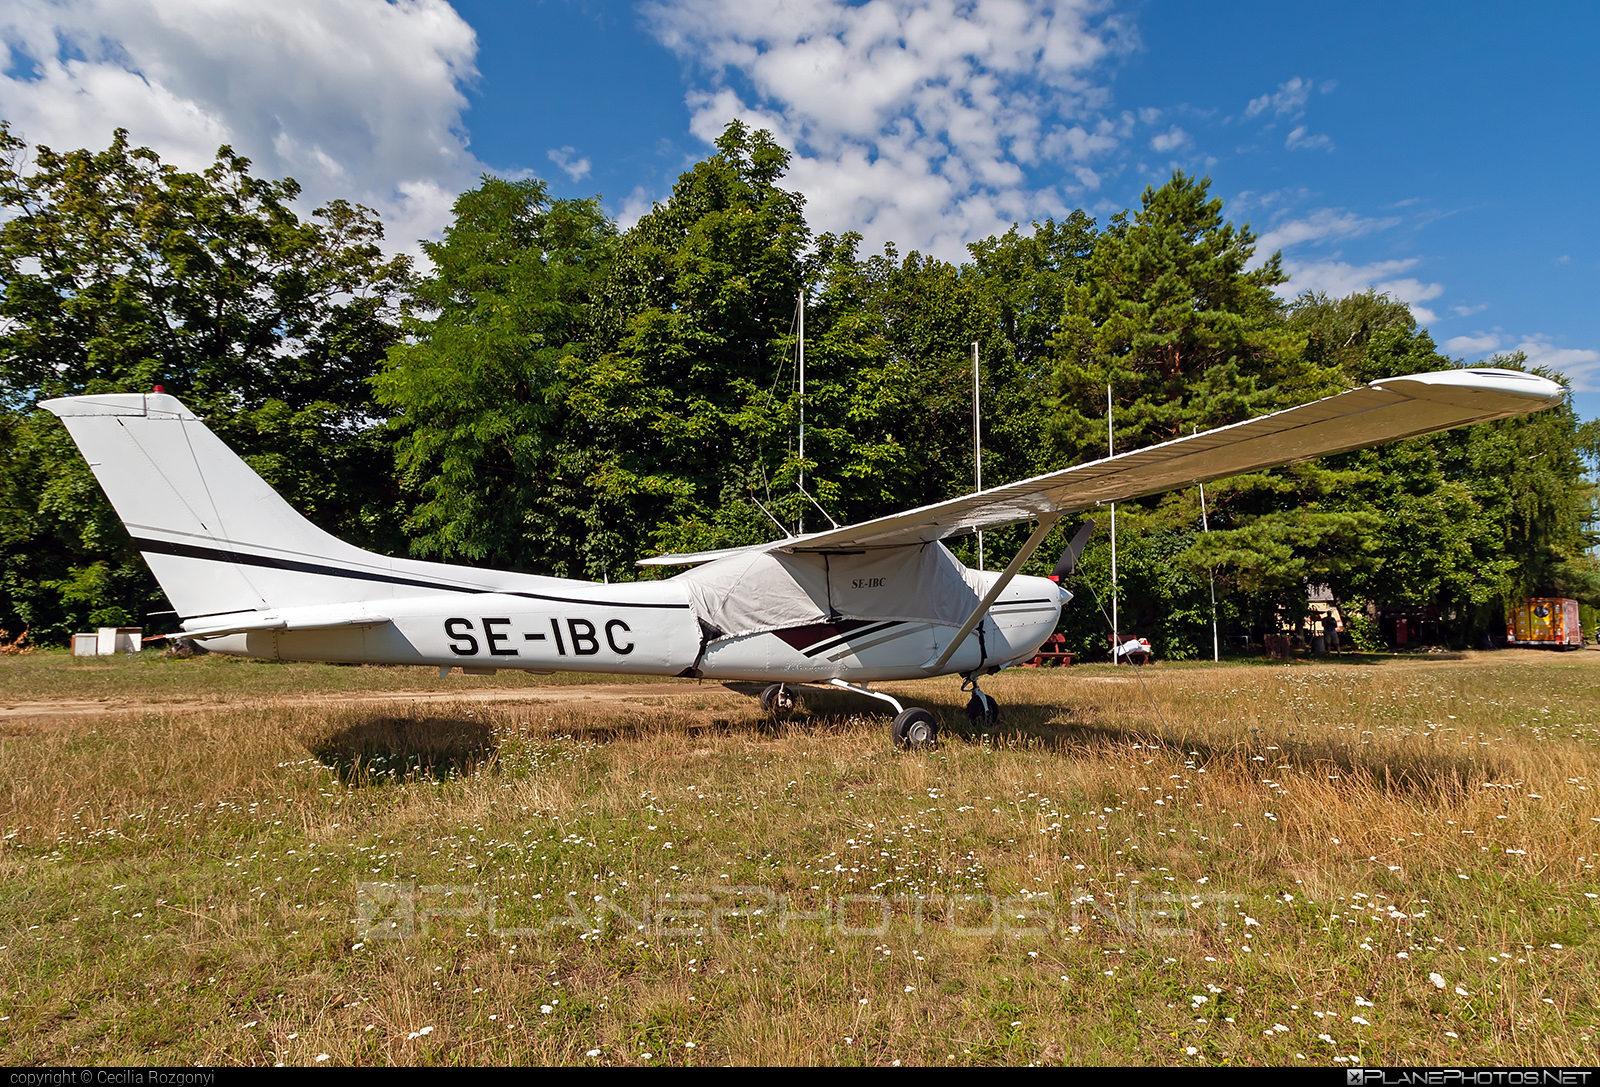 Reims FR182 Skylane RG - SE-IBC operated by Private operator #cessna182 #cessna182rg #cessna182skylane #cessna182skylanerg #cessnaskylane #fr182rg #fr182skylanerg #reims #reims182 #reims182skylane #reimsfr182skylanerg